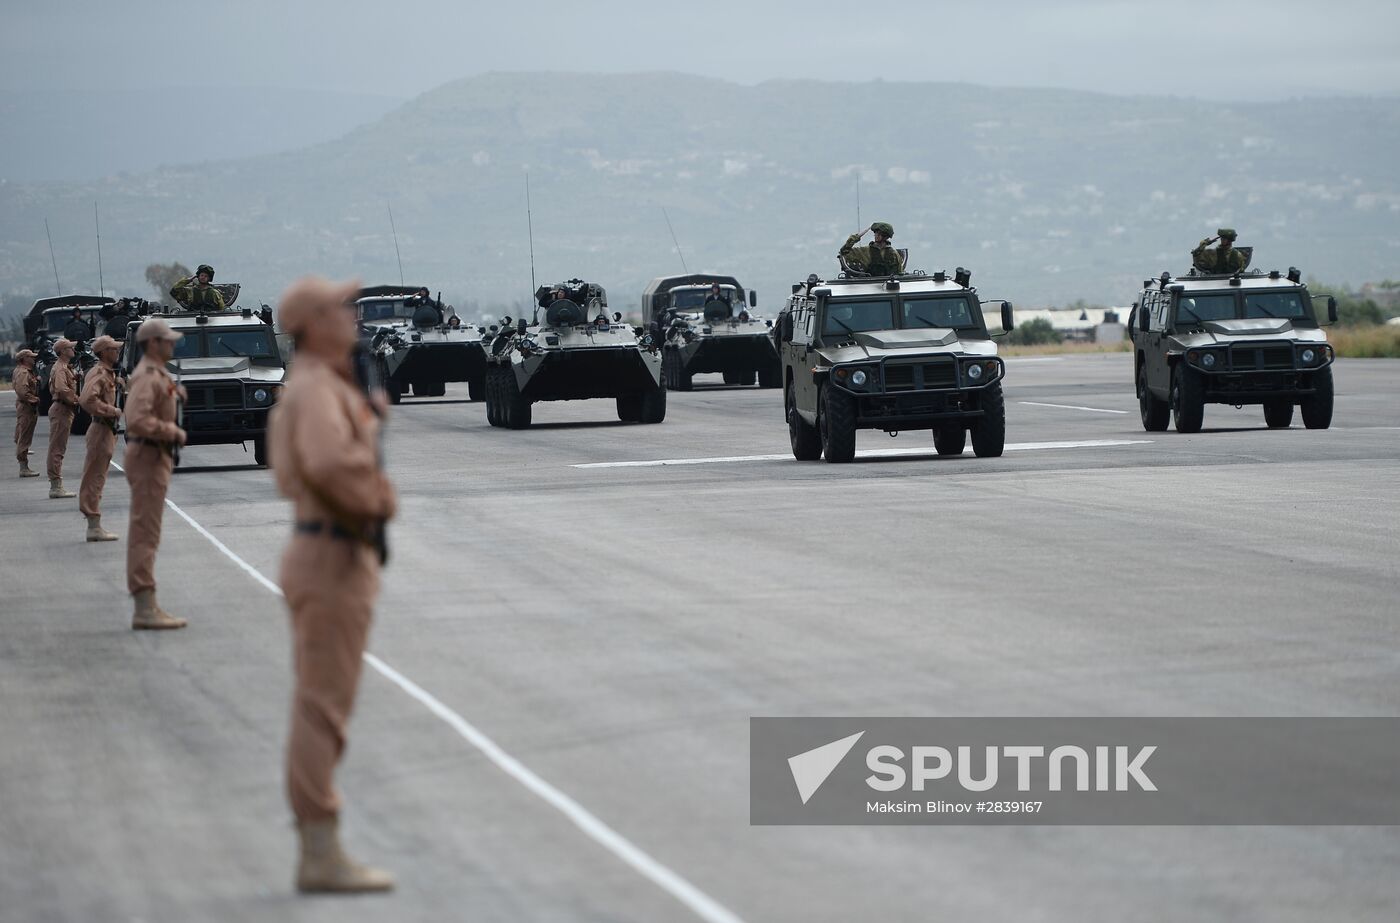 Final Victory Day parade rehearsal at Khmeimim airbase in Syria